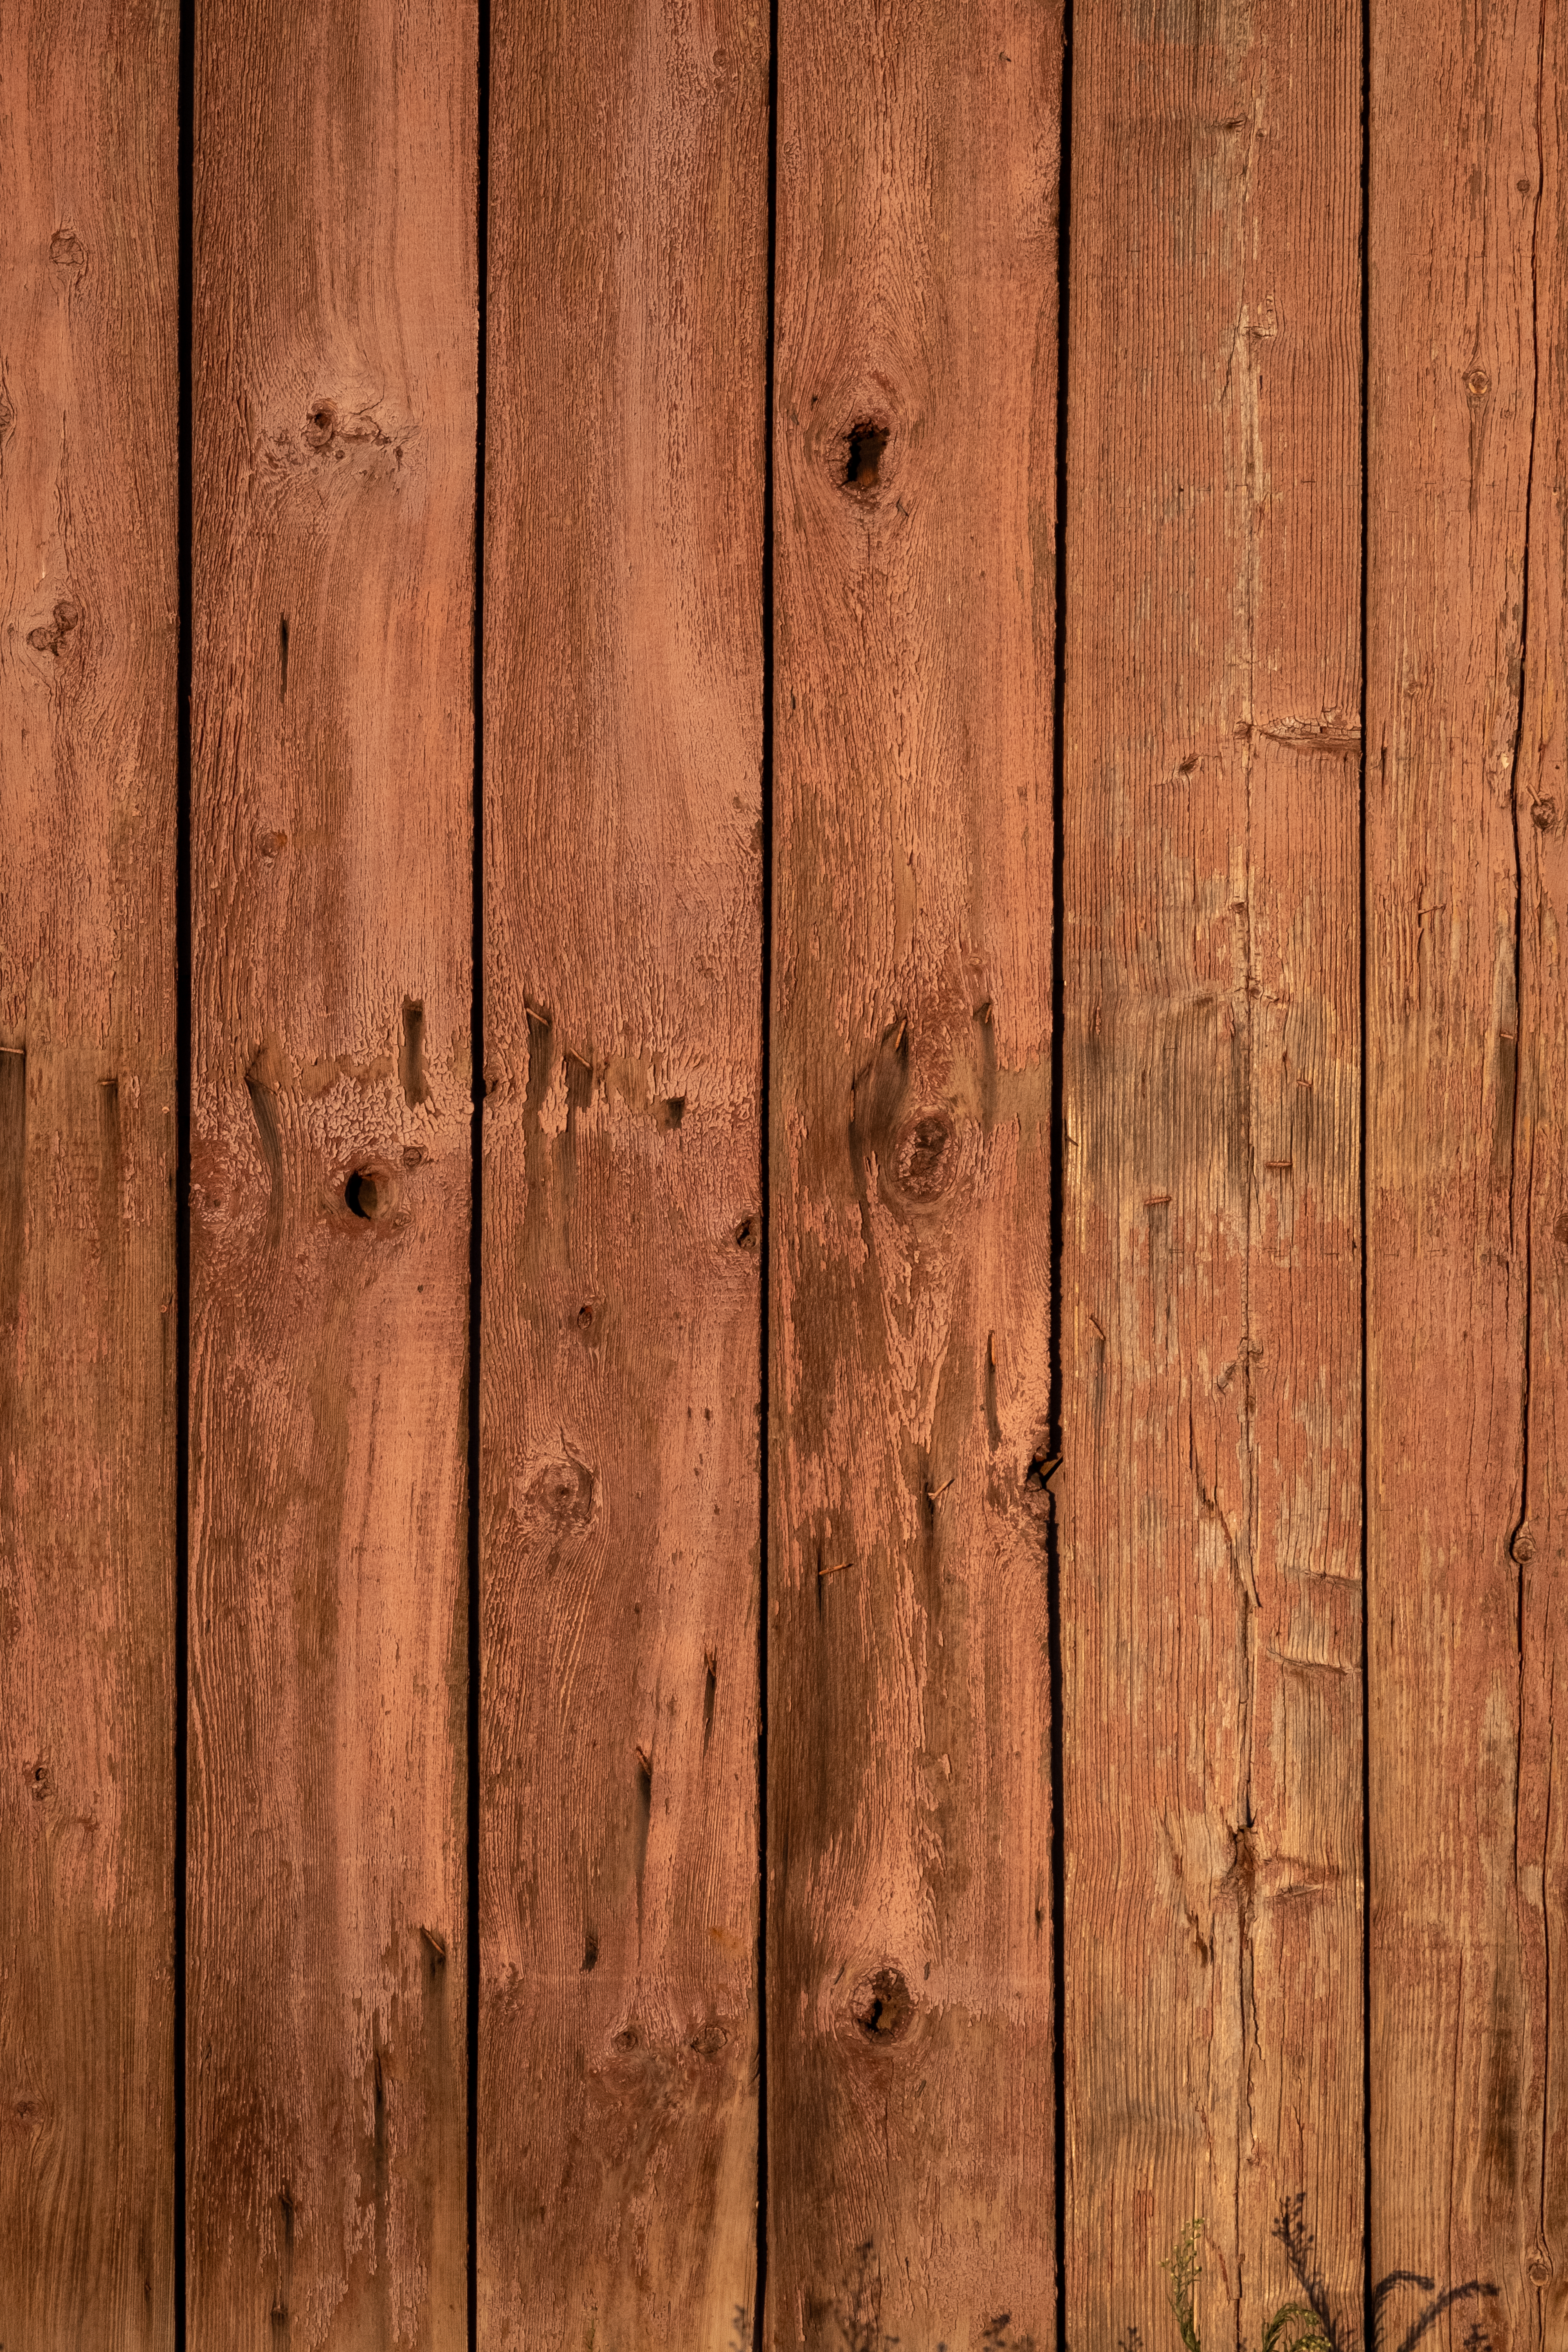 wooden, planks, wood, texture, textures, paint, brown, surface, board 2160p